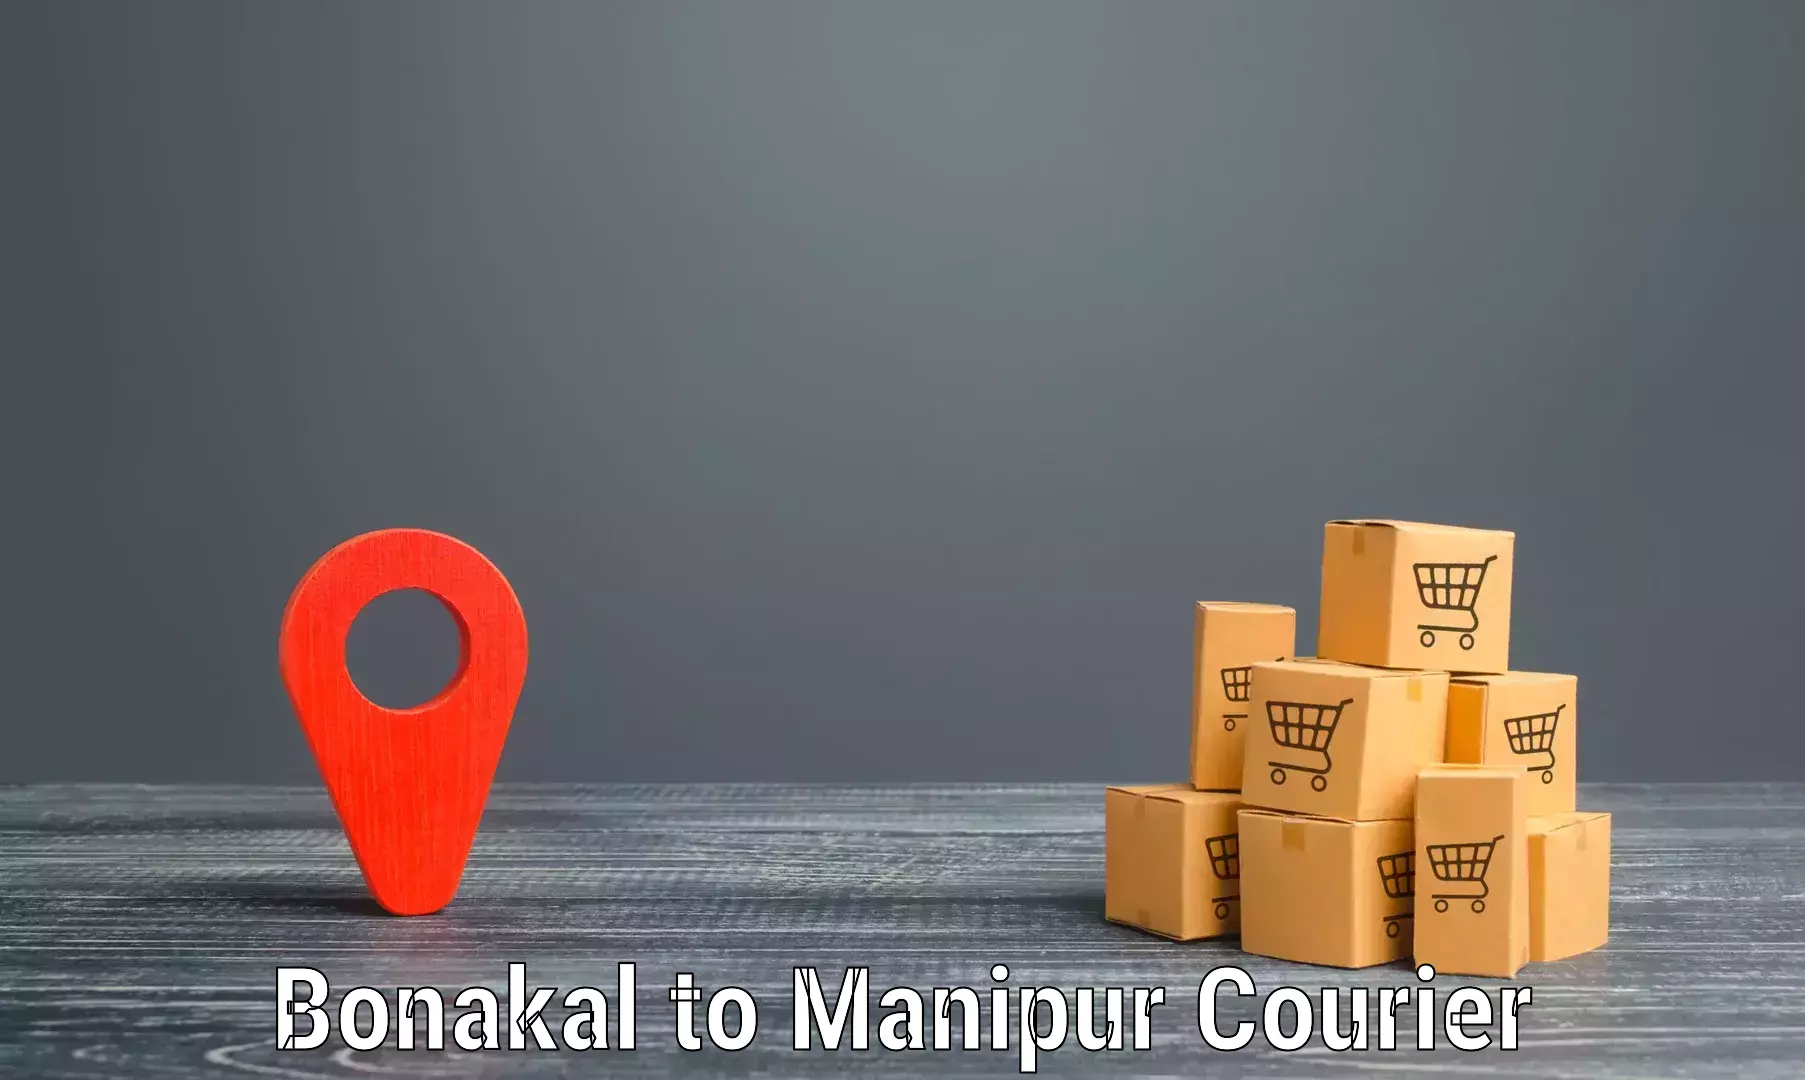 Speedy delivery service Bonakal to Imphal